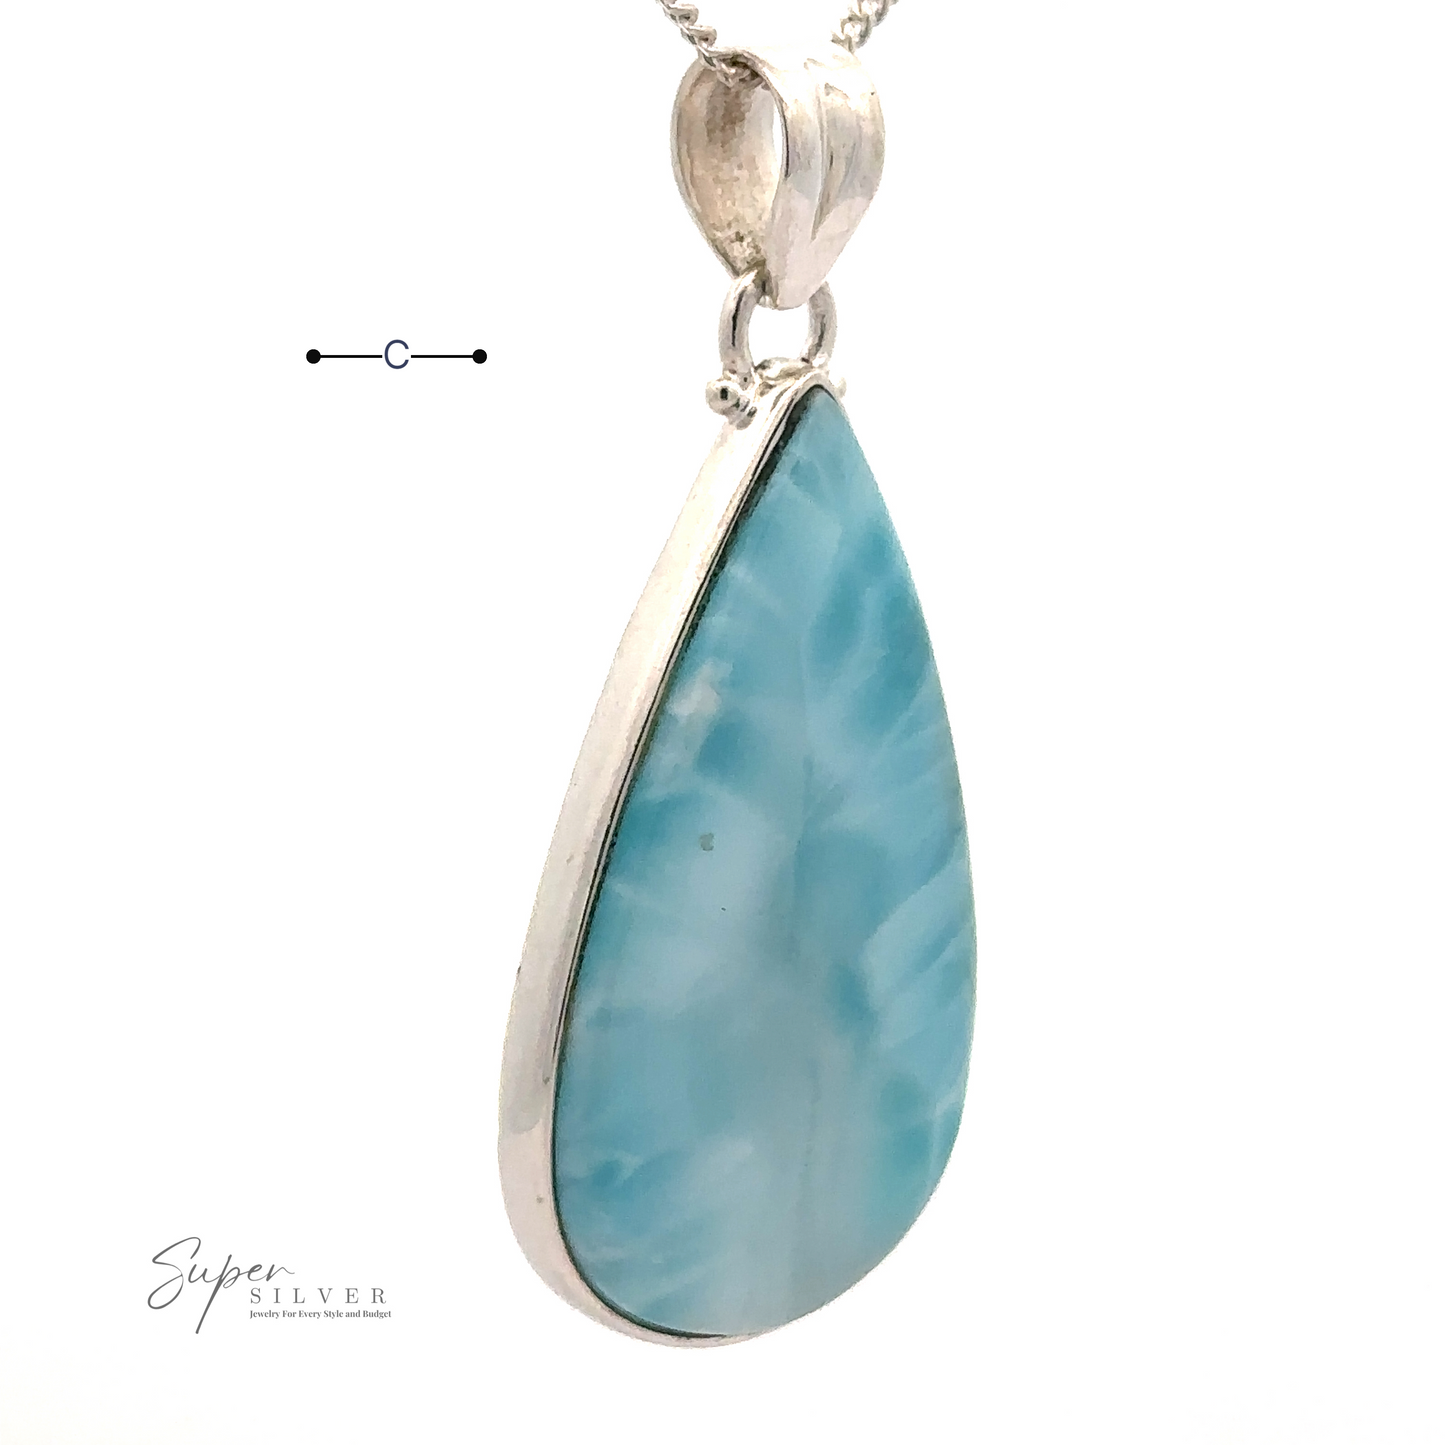 
                  
                    A Larger Teardrop Larimar Pendant set in Sterling Silver hangs from a silver chain. The background is plain white, displaying the Super Silver logo in the bottom left corner.
                  
                